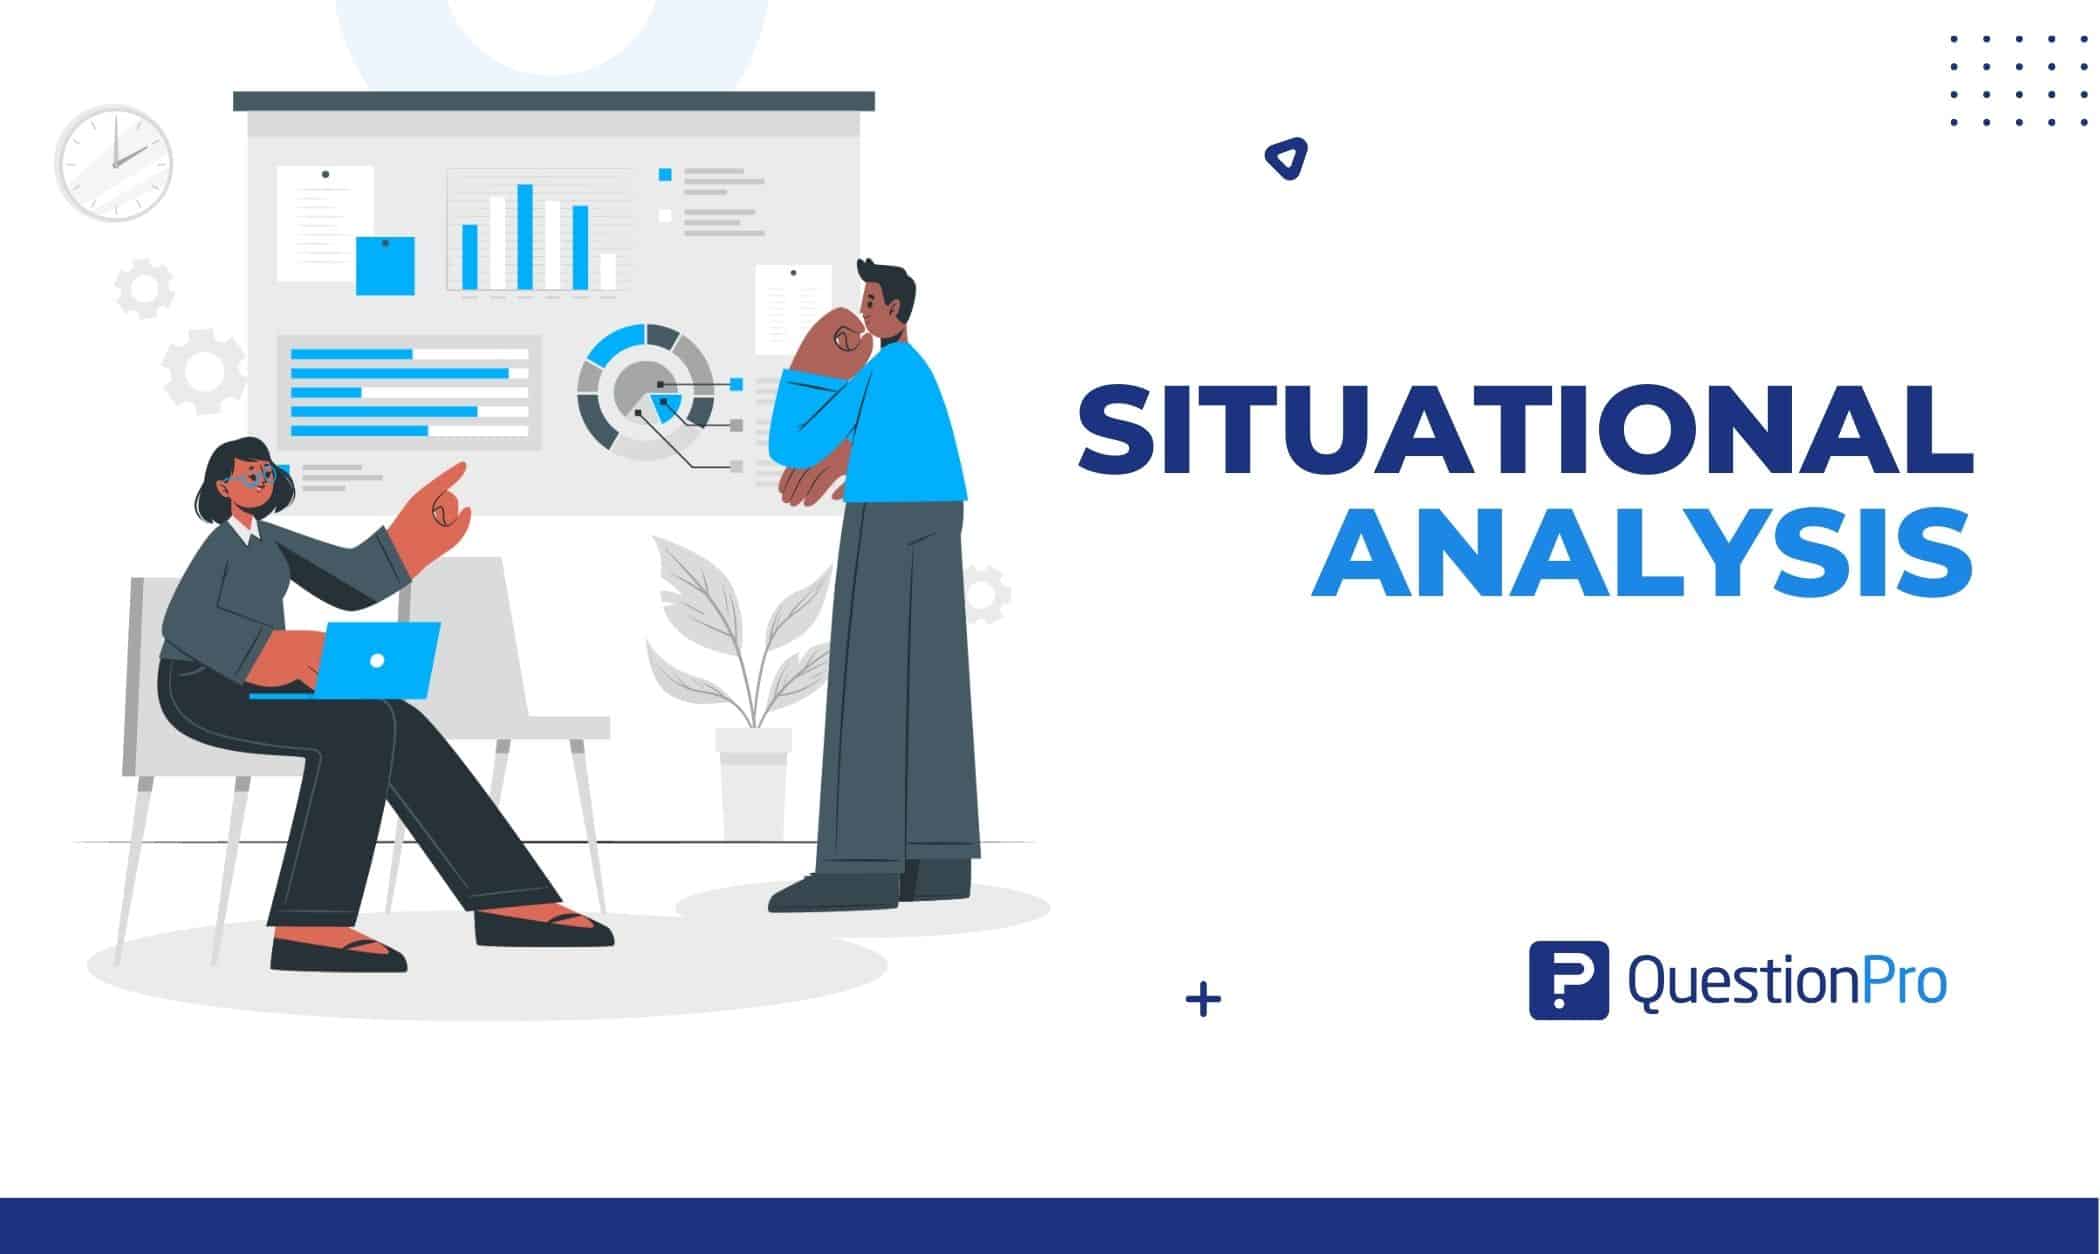 Situation analysis examines how a business maintains its internal and external context. Learn everything you need to know in this post.